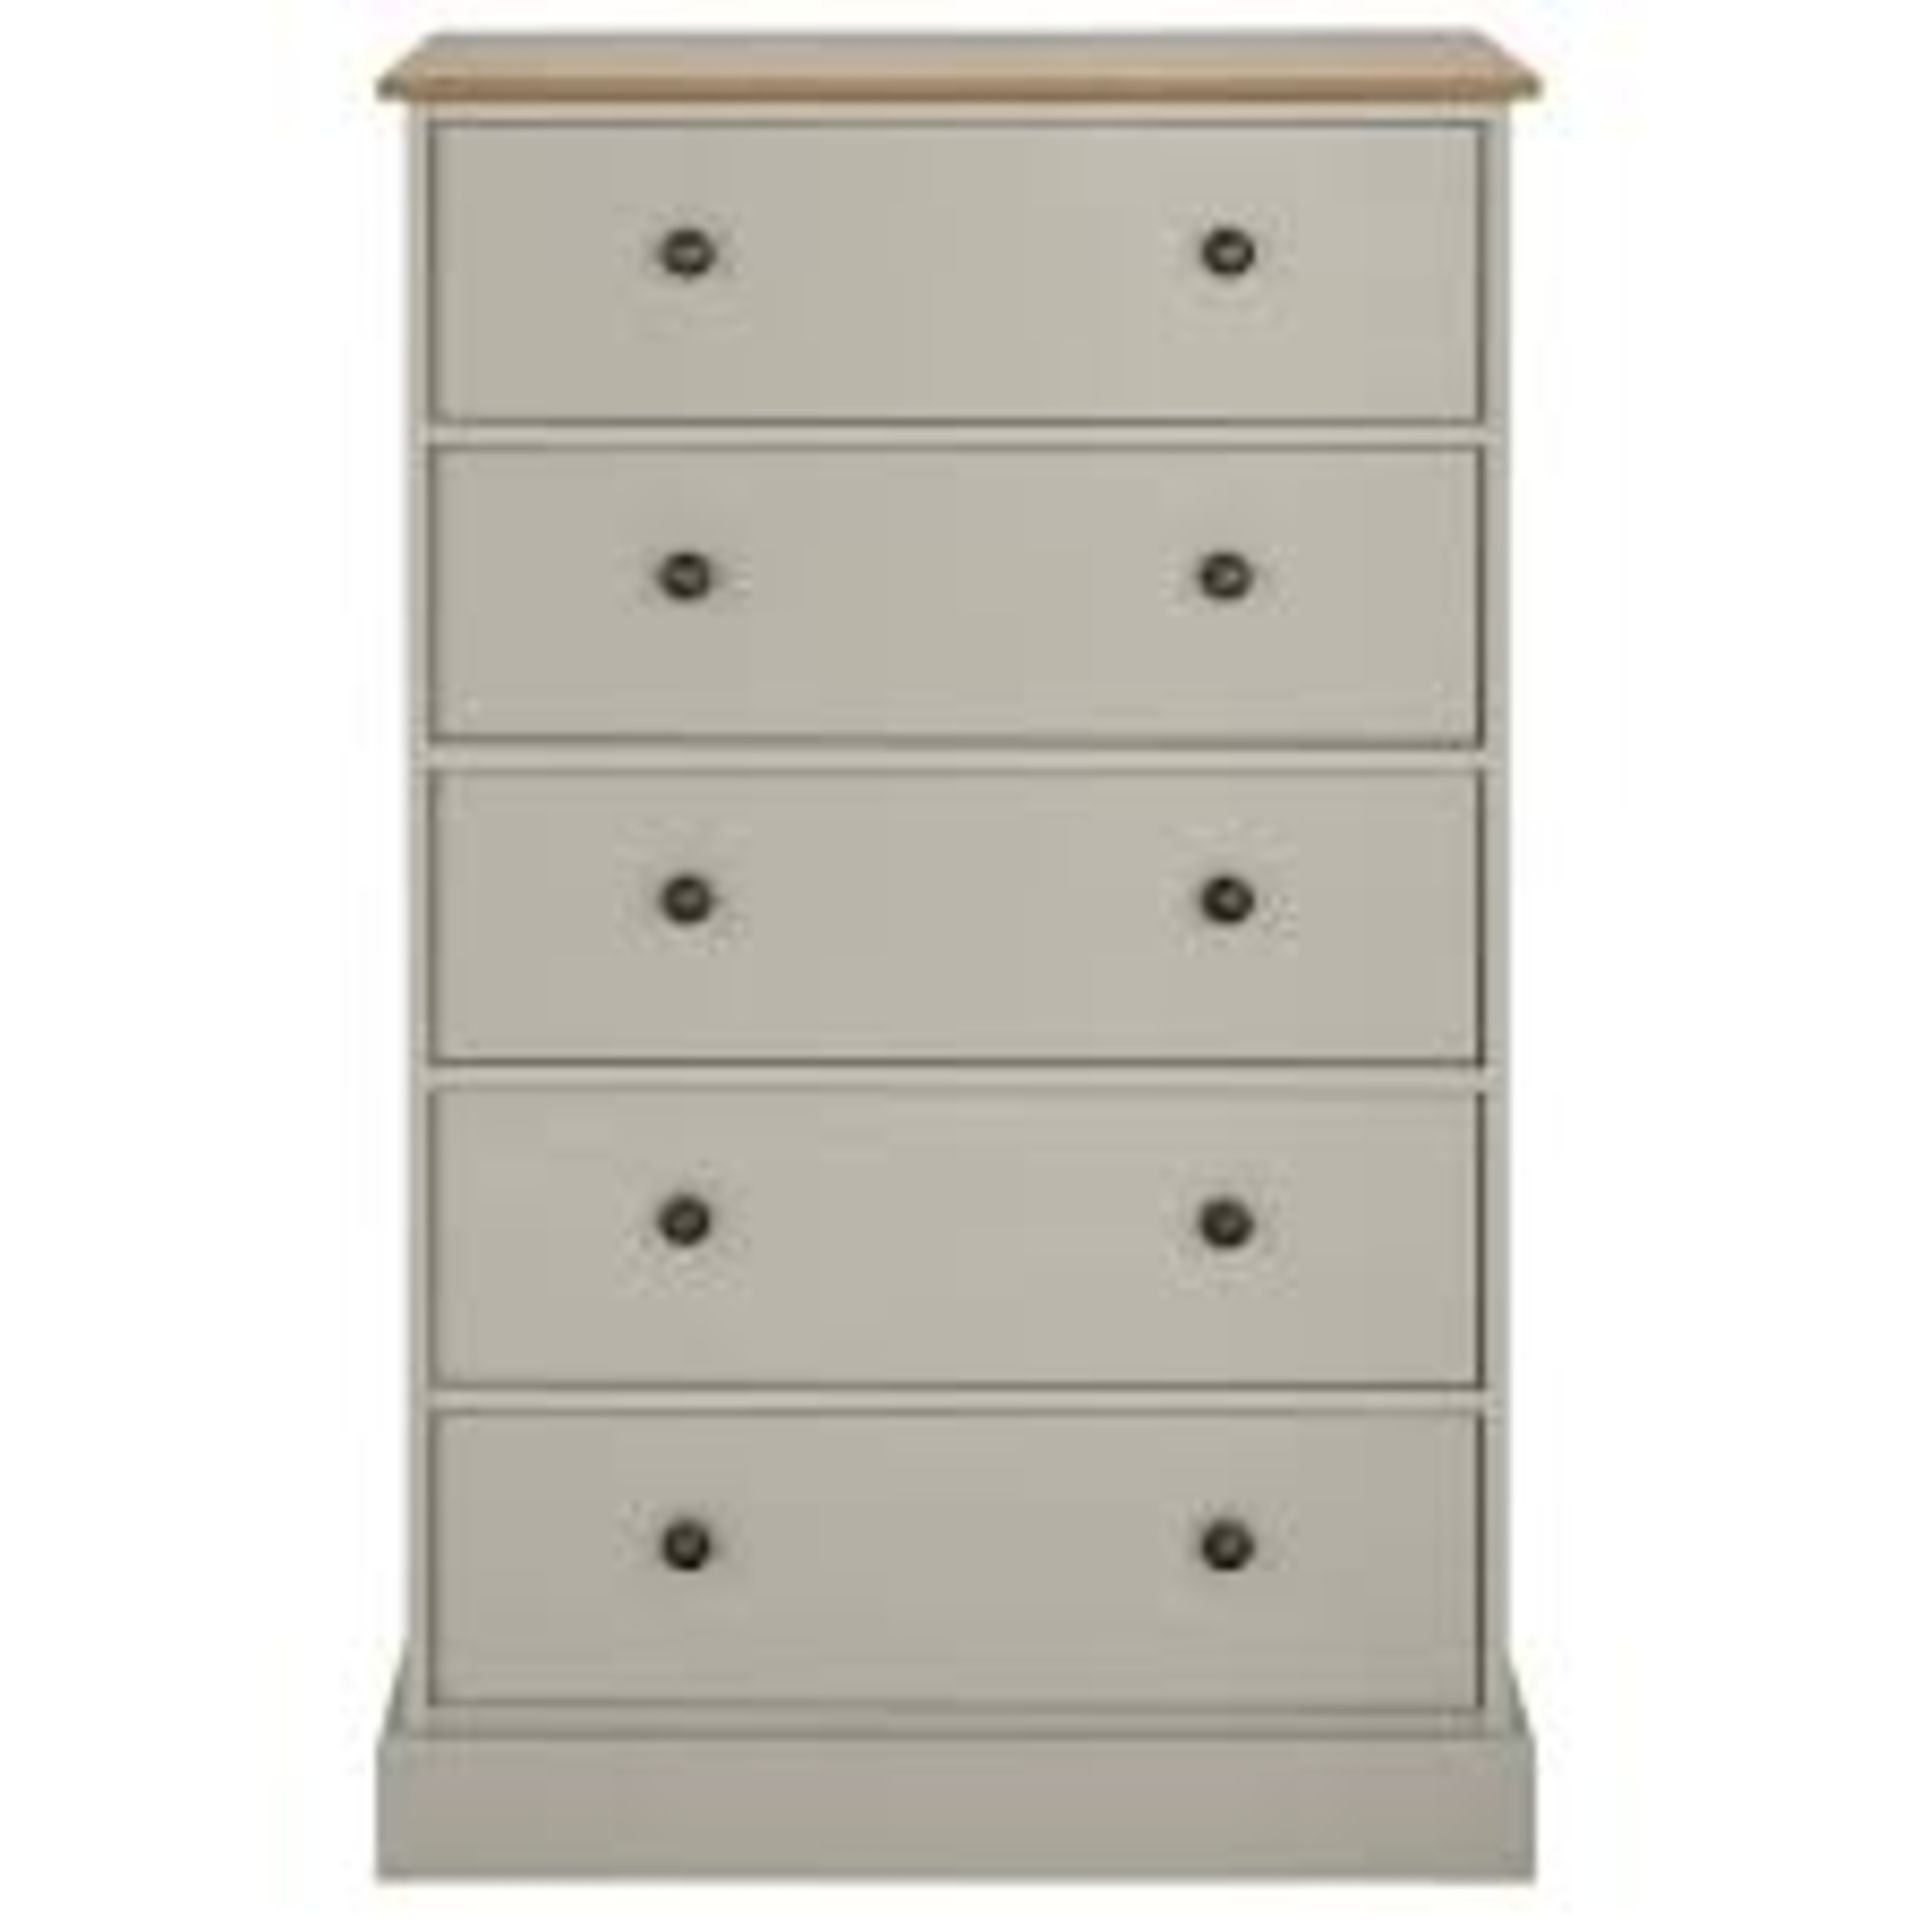 Kensington 5 Drawer Chest - Soft Grey/Oak Effect. RRP £219.00. - SR5. Create a refined, country-